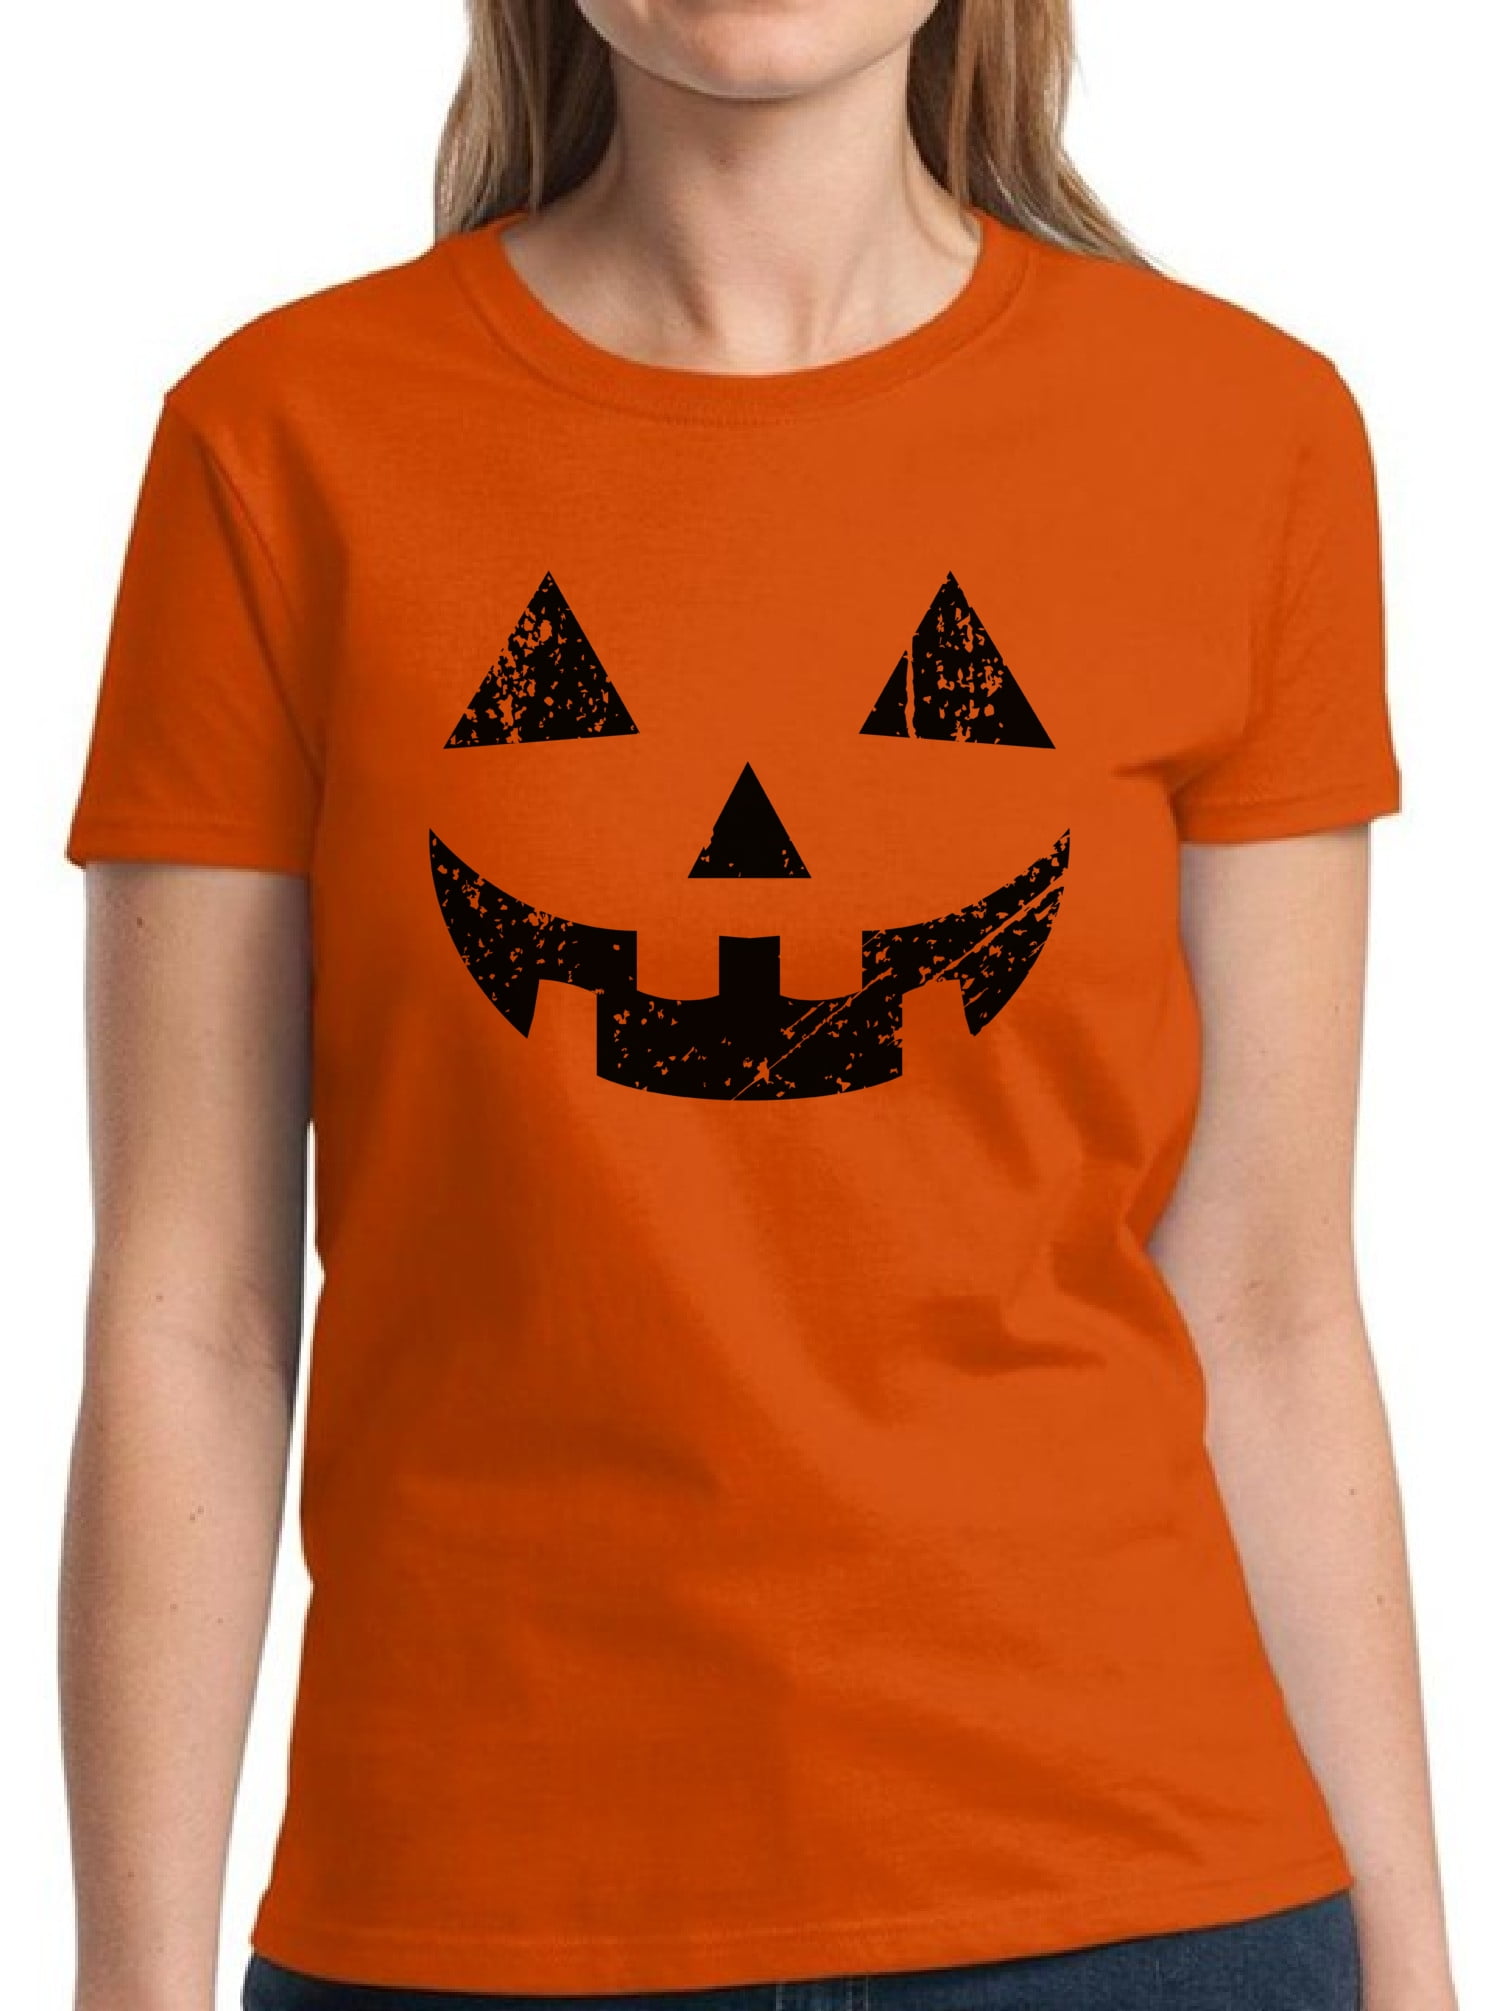 Trick or Treat Fitted T-shirt in Ivory Size S,M,L,XL,2XL,3XL